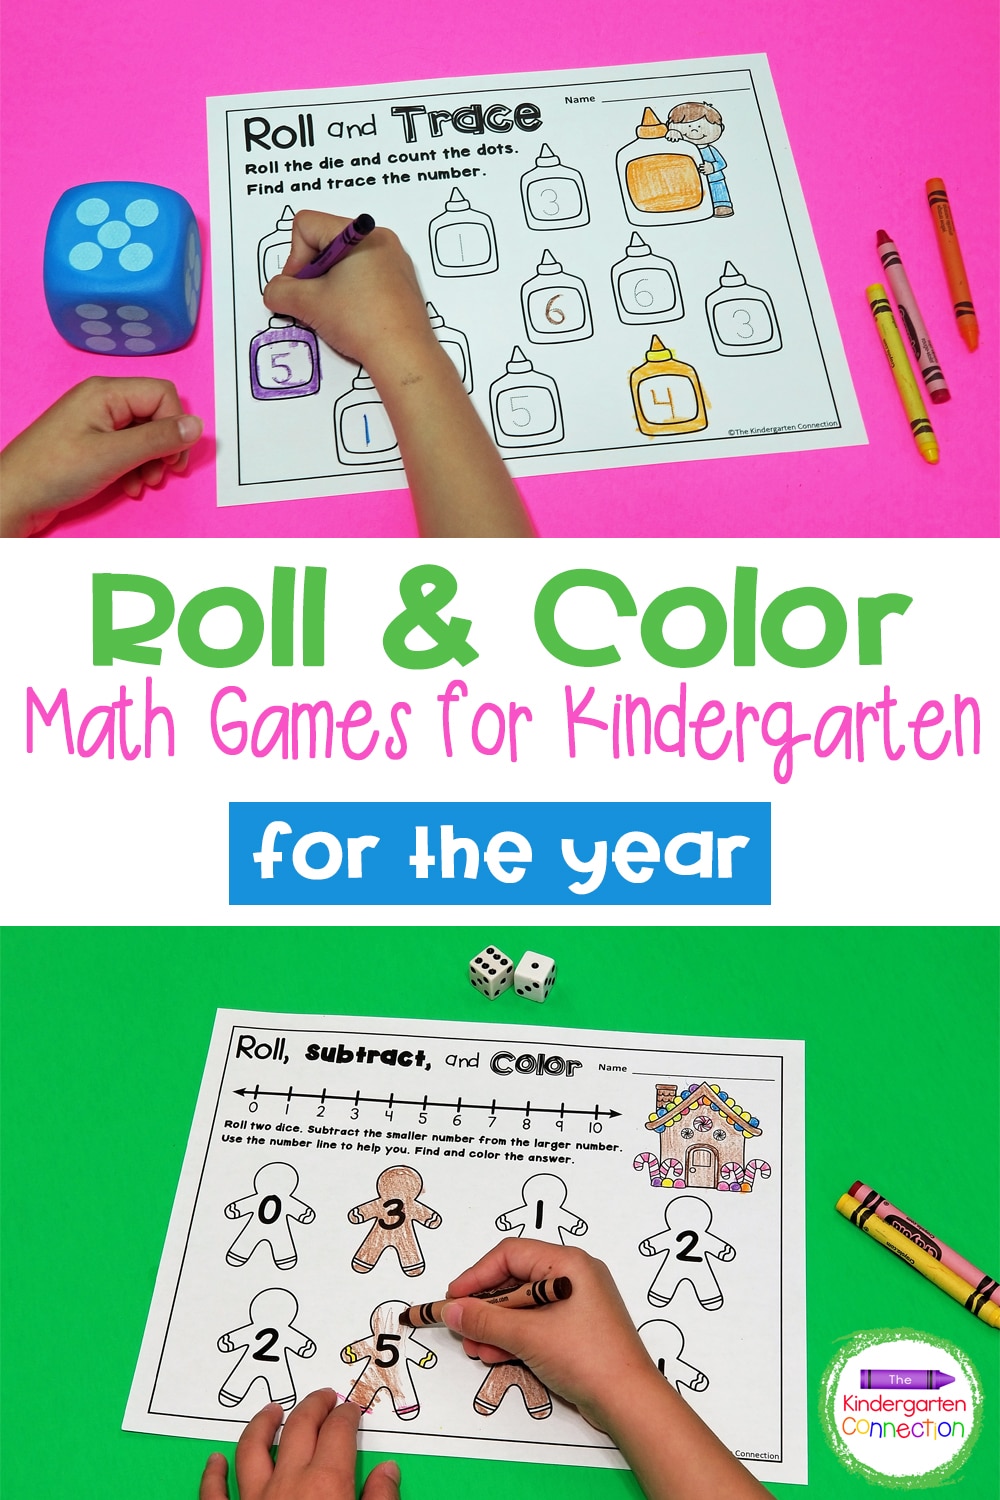 Roll and Color Dice Math Games for the Year